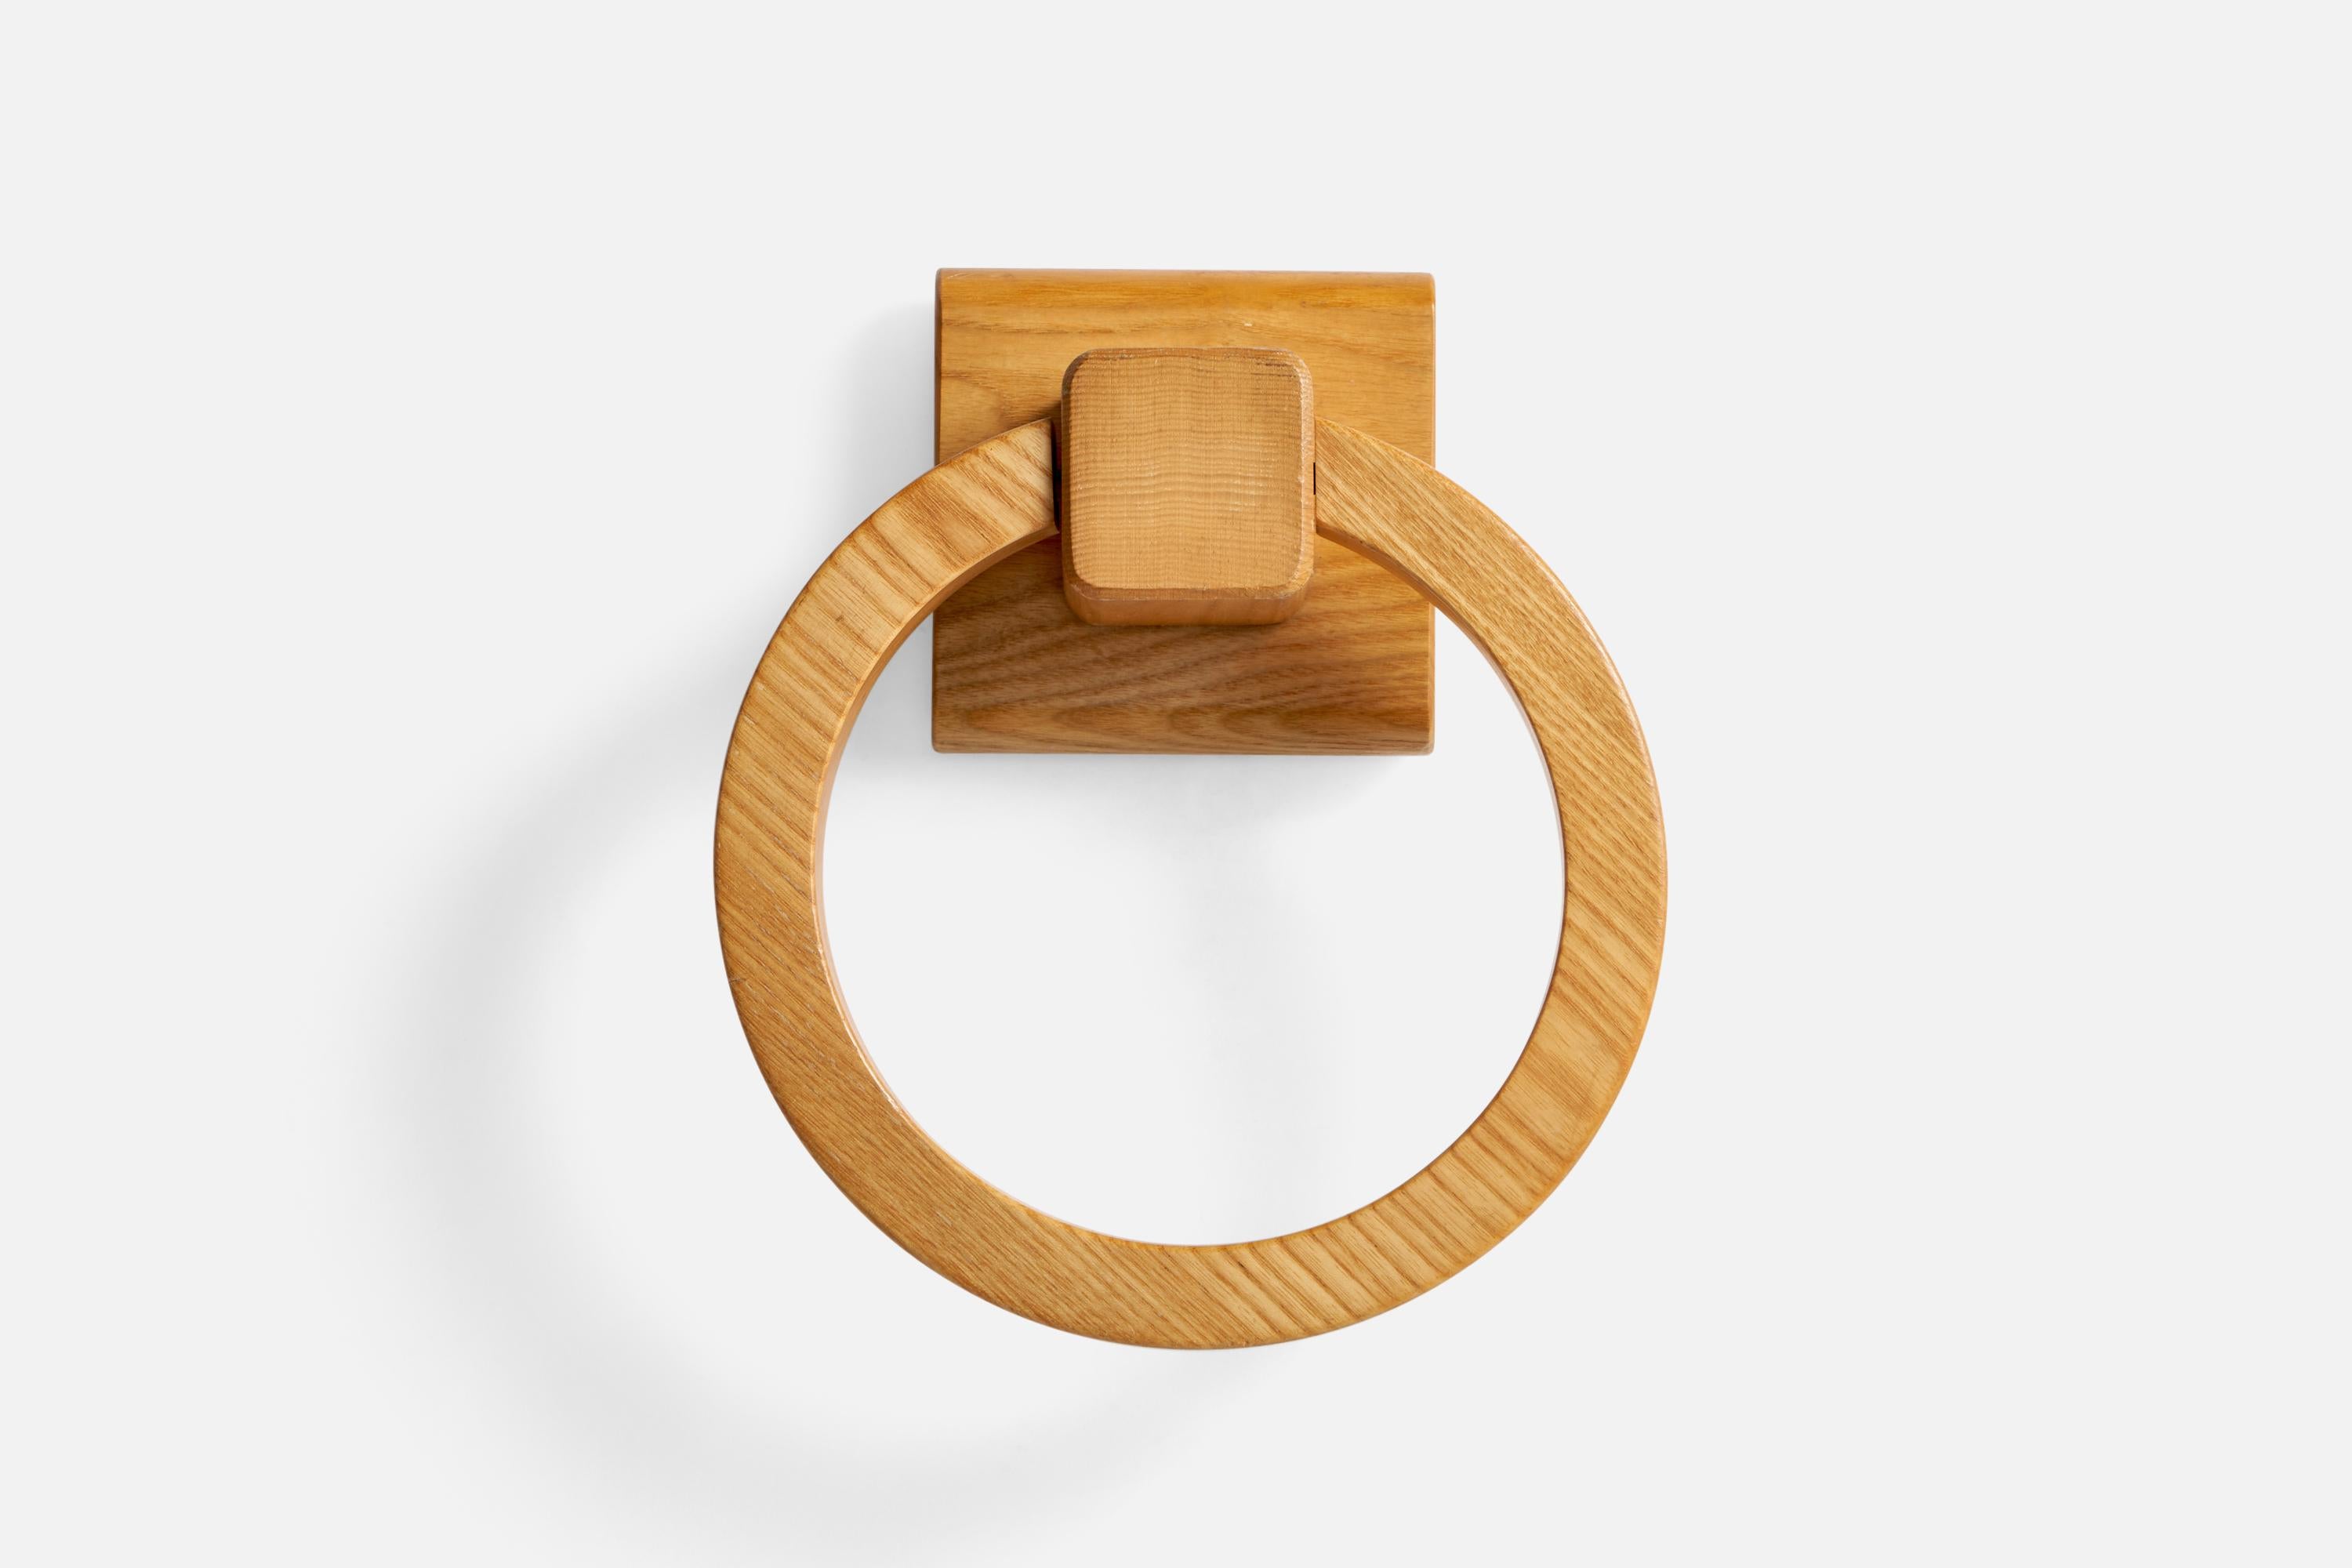 An oak towel hanger designed and produced in Italy, 1970s.